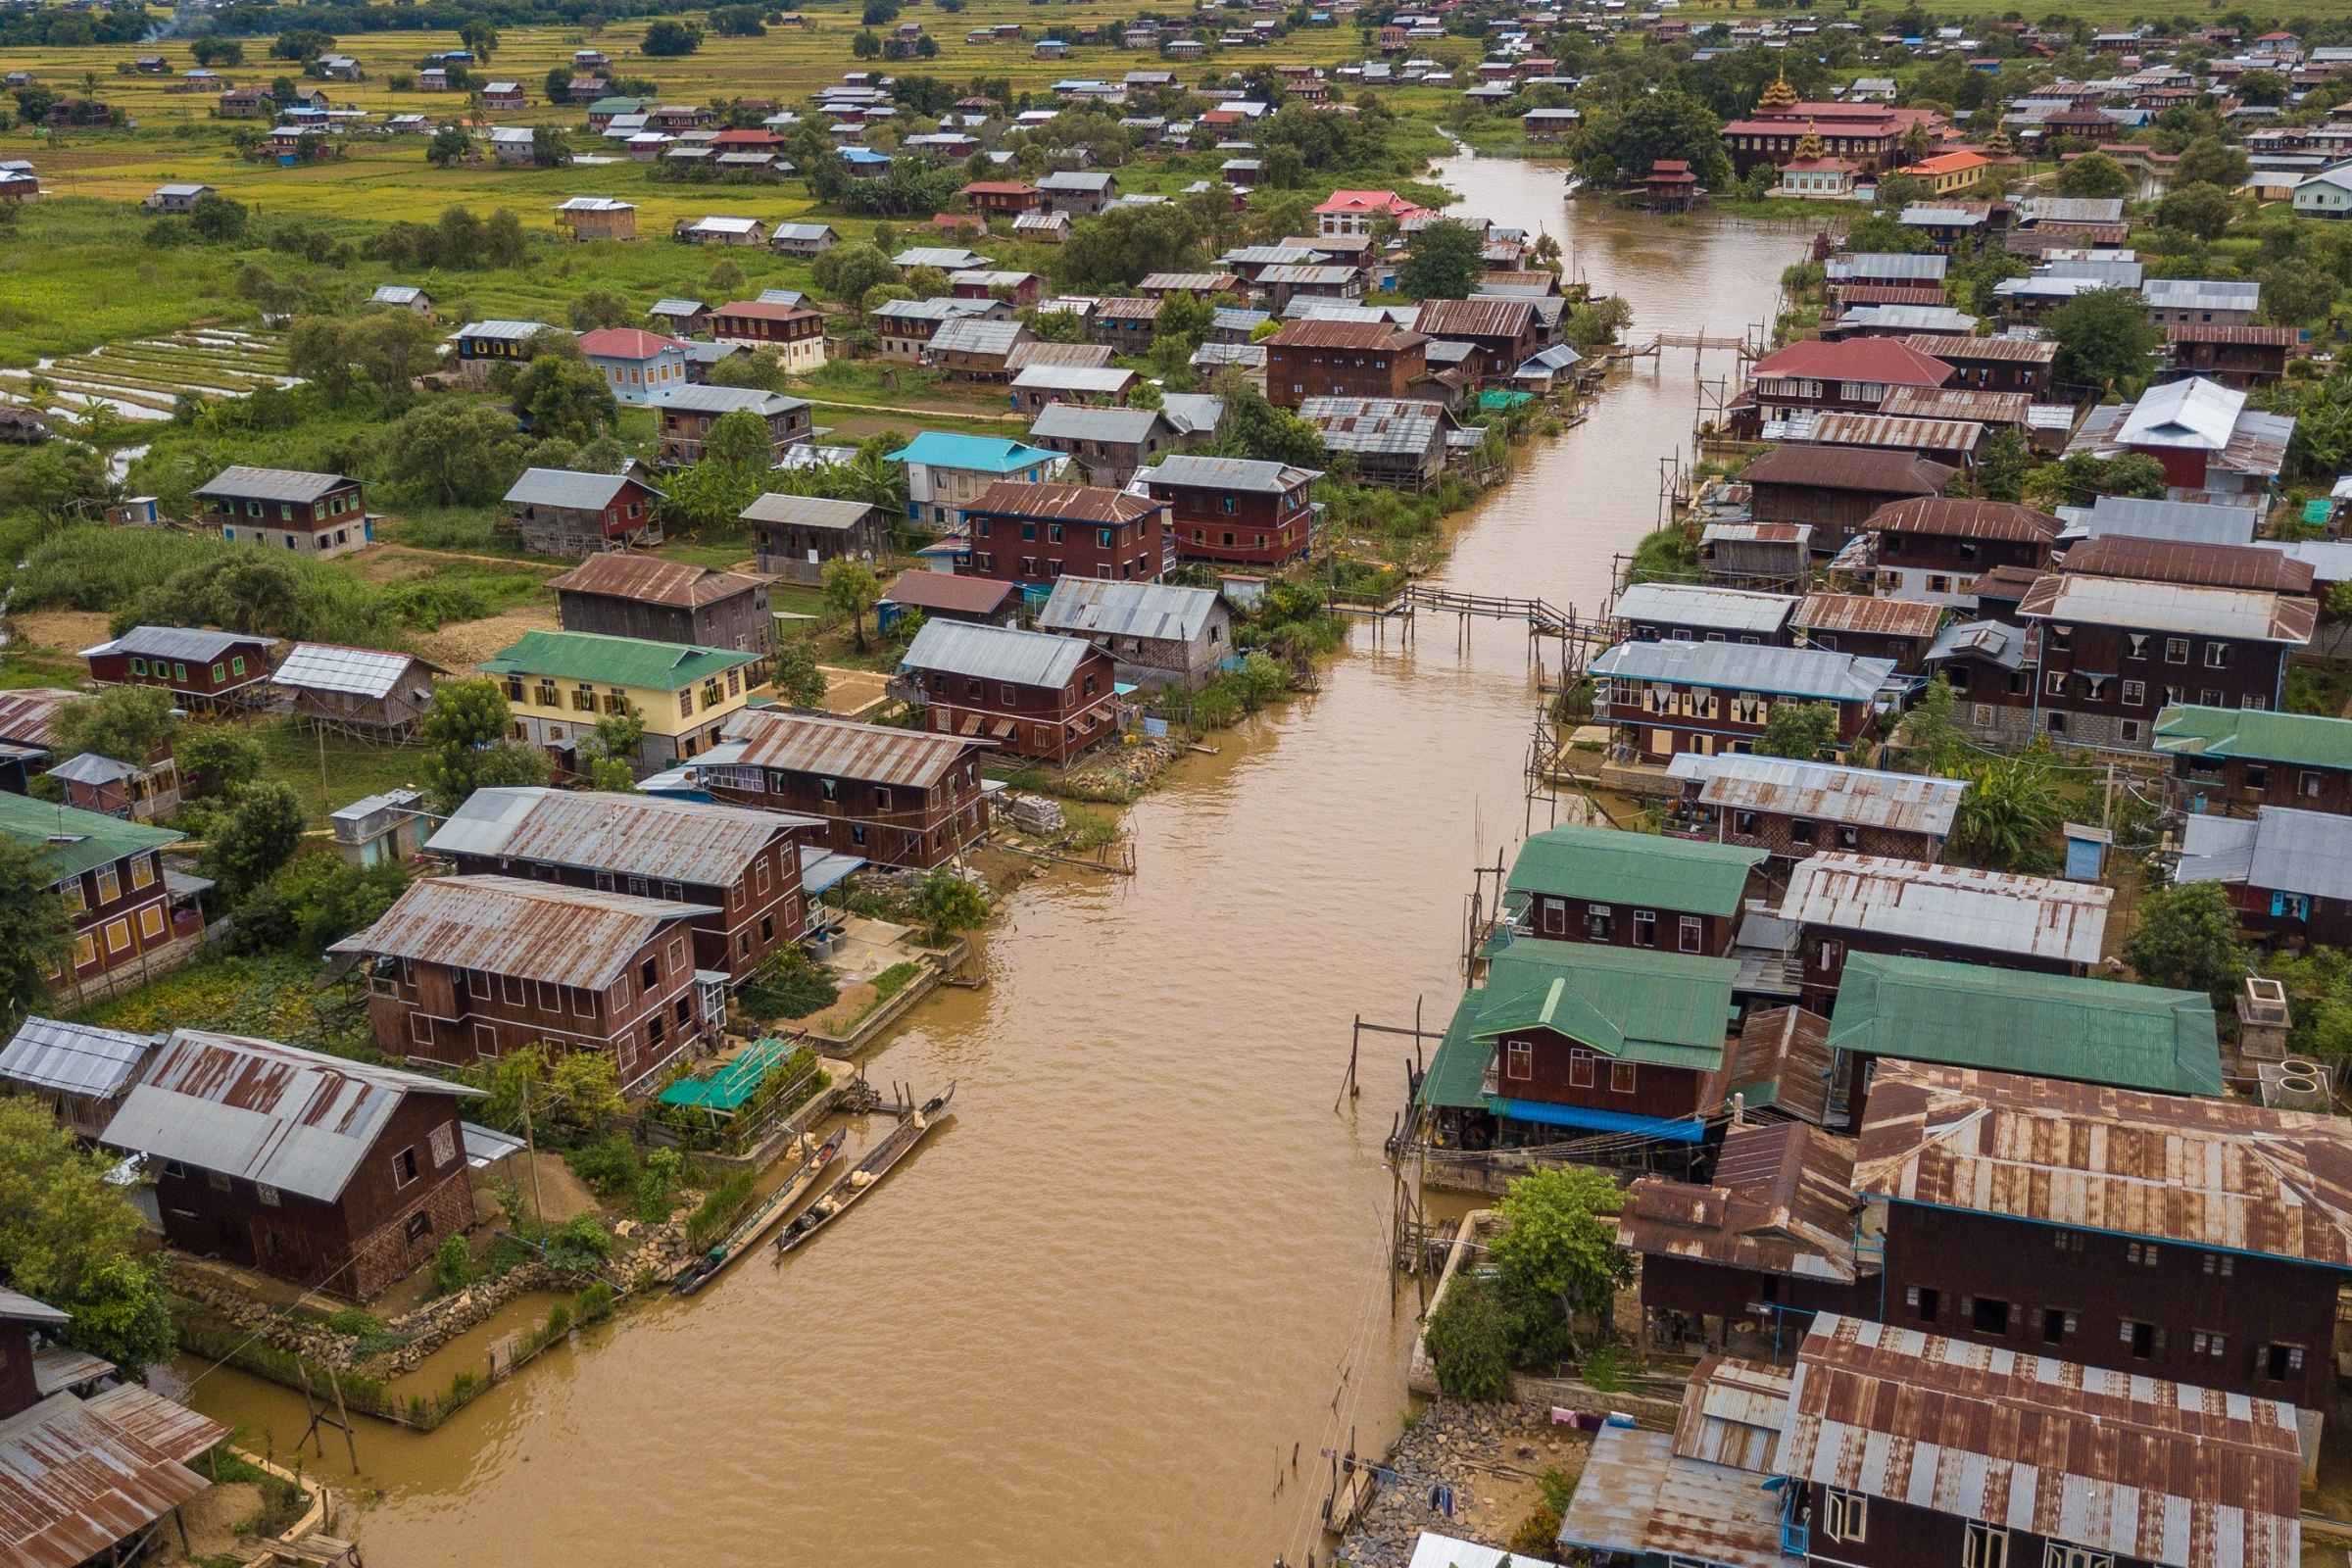 Floods are the most common cause of disasters, disproportionally affecting the poorest communities.